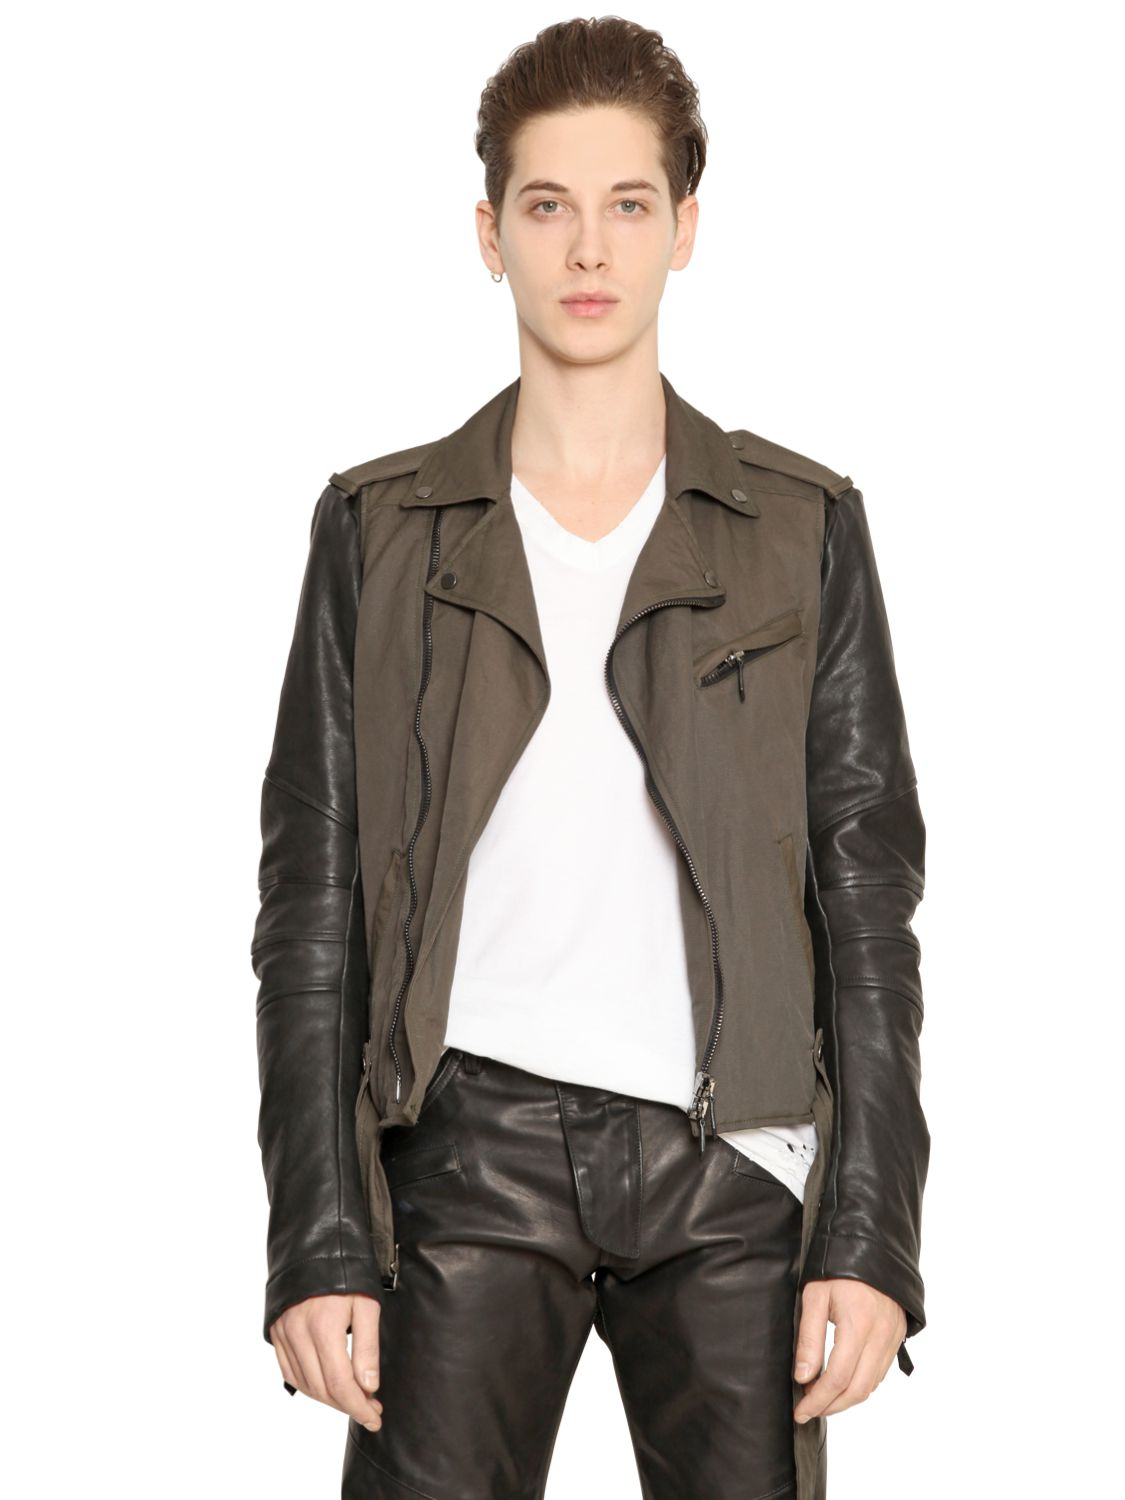 Balmain Cotton Canvas & Leather Biker Jacket in Military Green (Natural)  for Men - Lyst